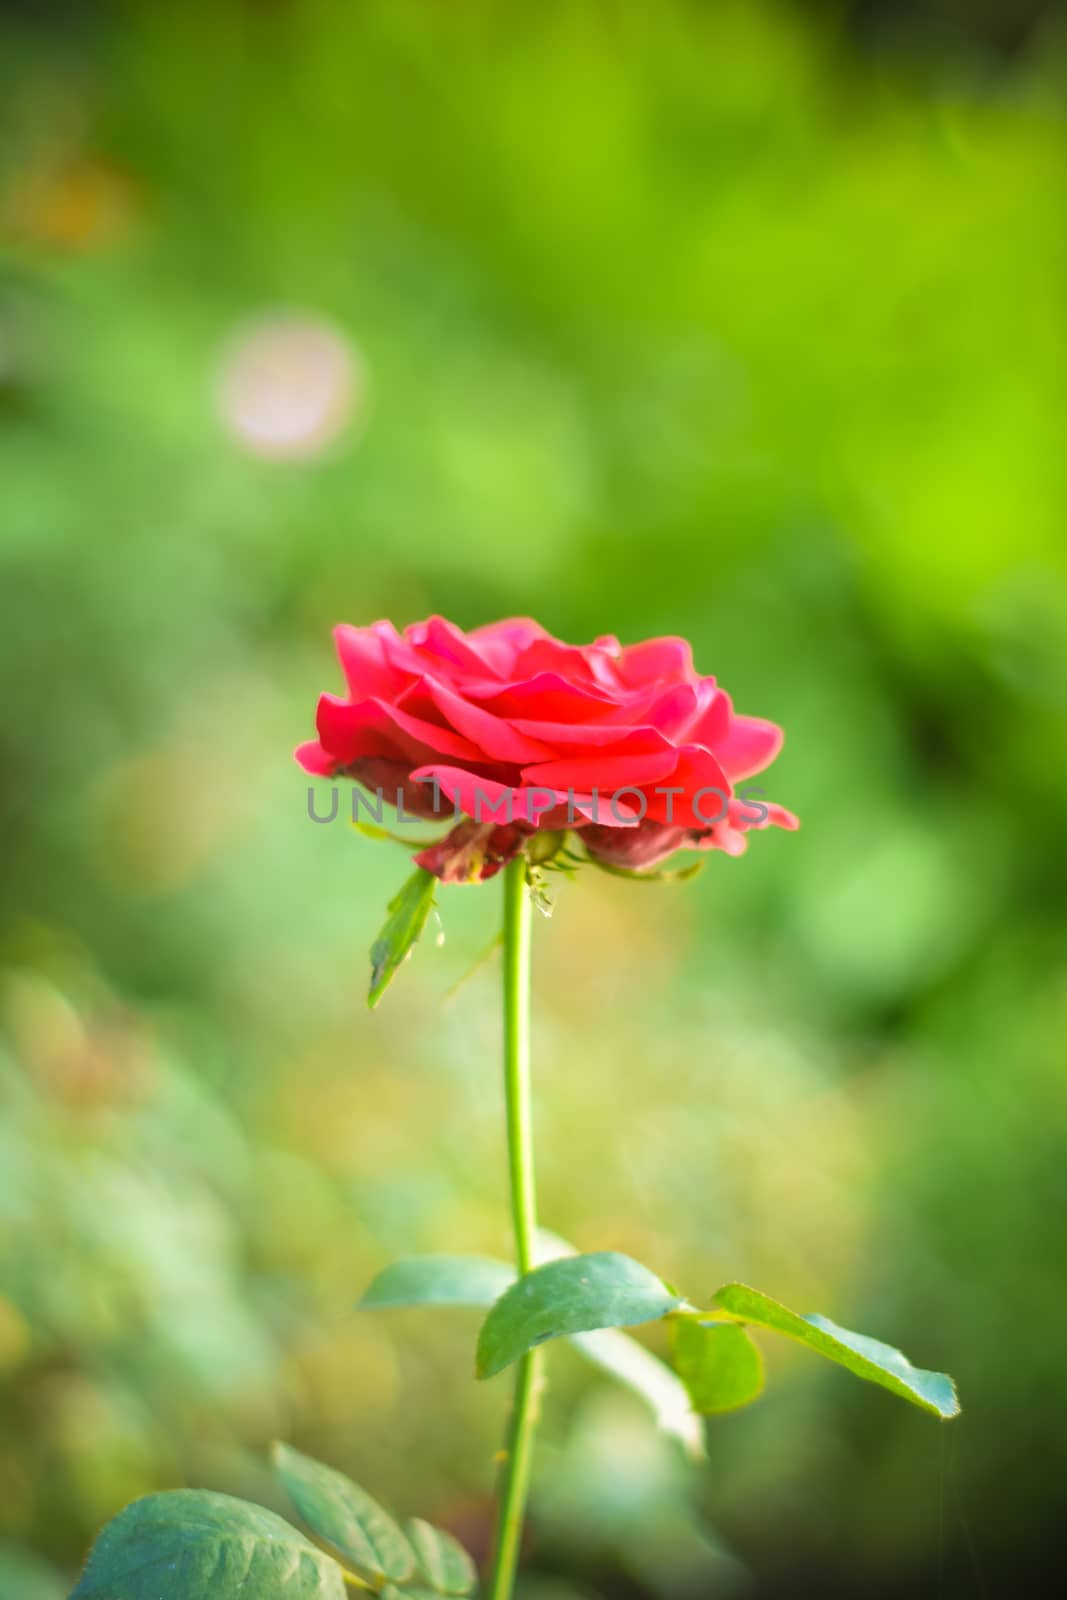 Close up of beautiful one red rose on green branch. Rose and bud on garden. Valentines background. Pink rose with fresh leaves branches. Spring summer wedding romantic elegant date marriage symbol. by sudiptabhowmick